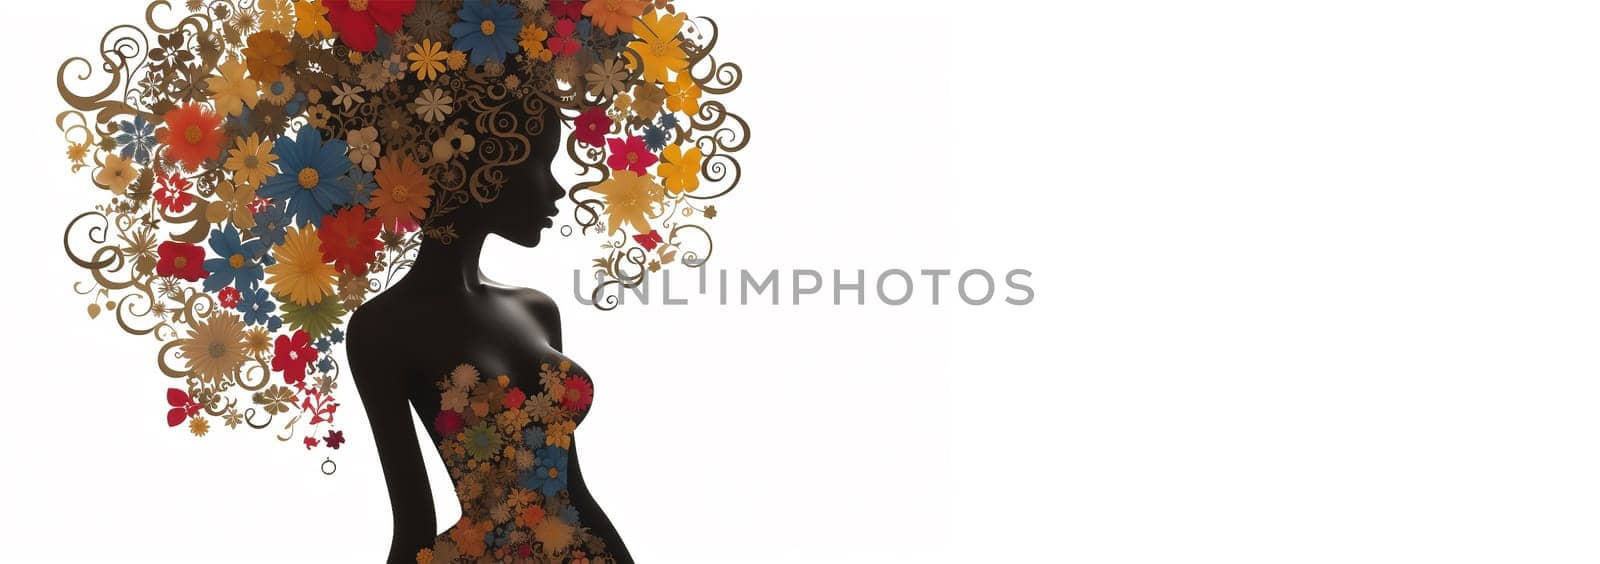 Afro African American woman with flowers in hair. Abstract woman portrait. American black skin girl with flower. Fashion illustration. Trendy modern minimalist design for wall art, postcards, social media isolated white background by Annebel146